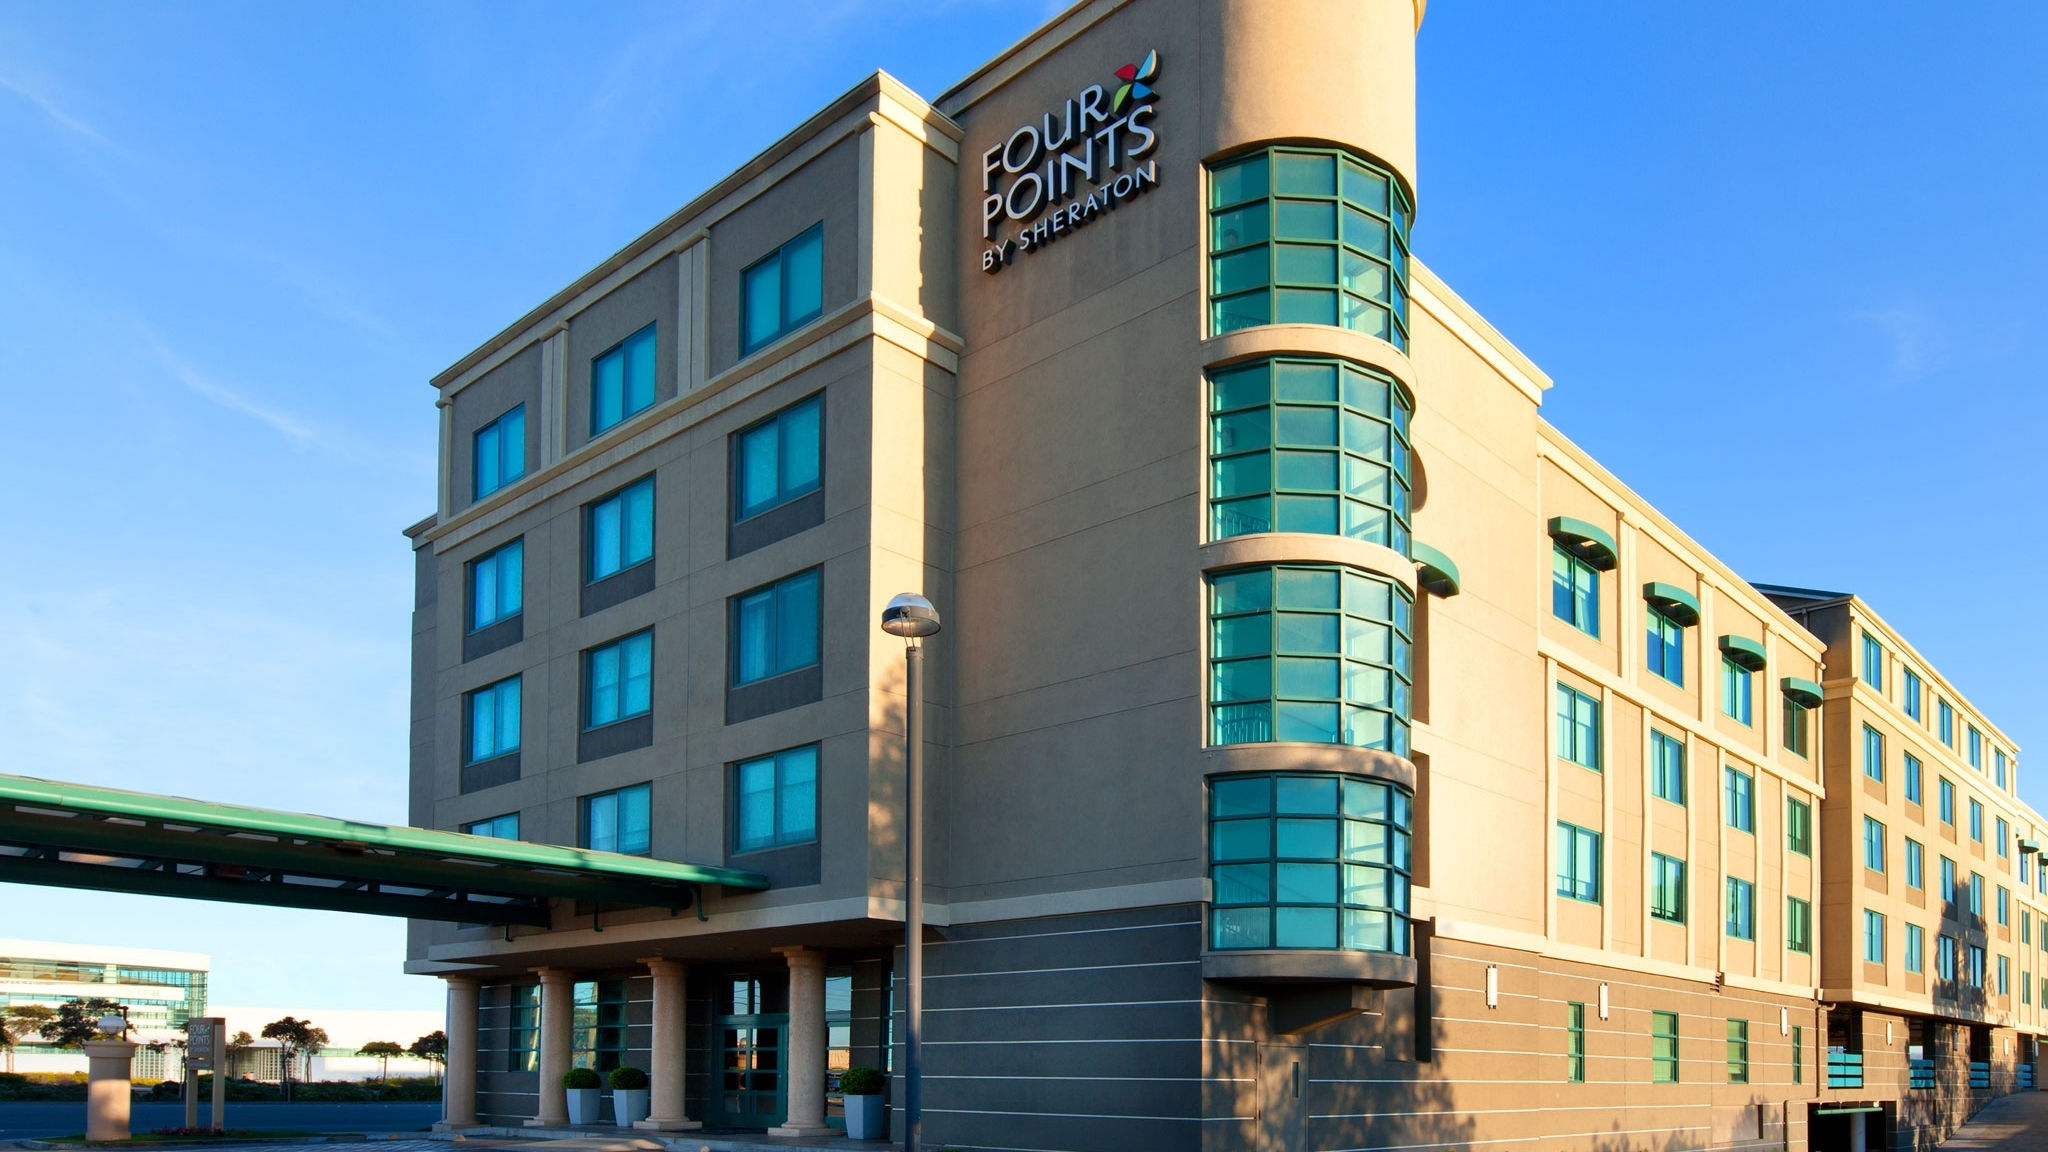 Photo of Four Points by Sheraton Hotel & Suites San Francisco Airport, South San Francisco, CA